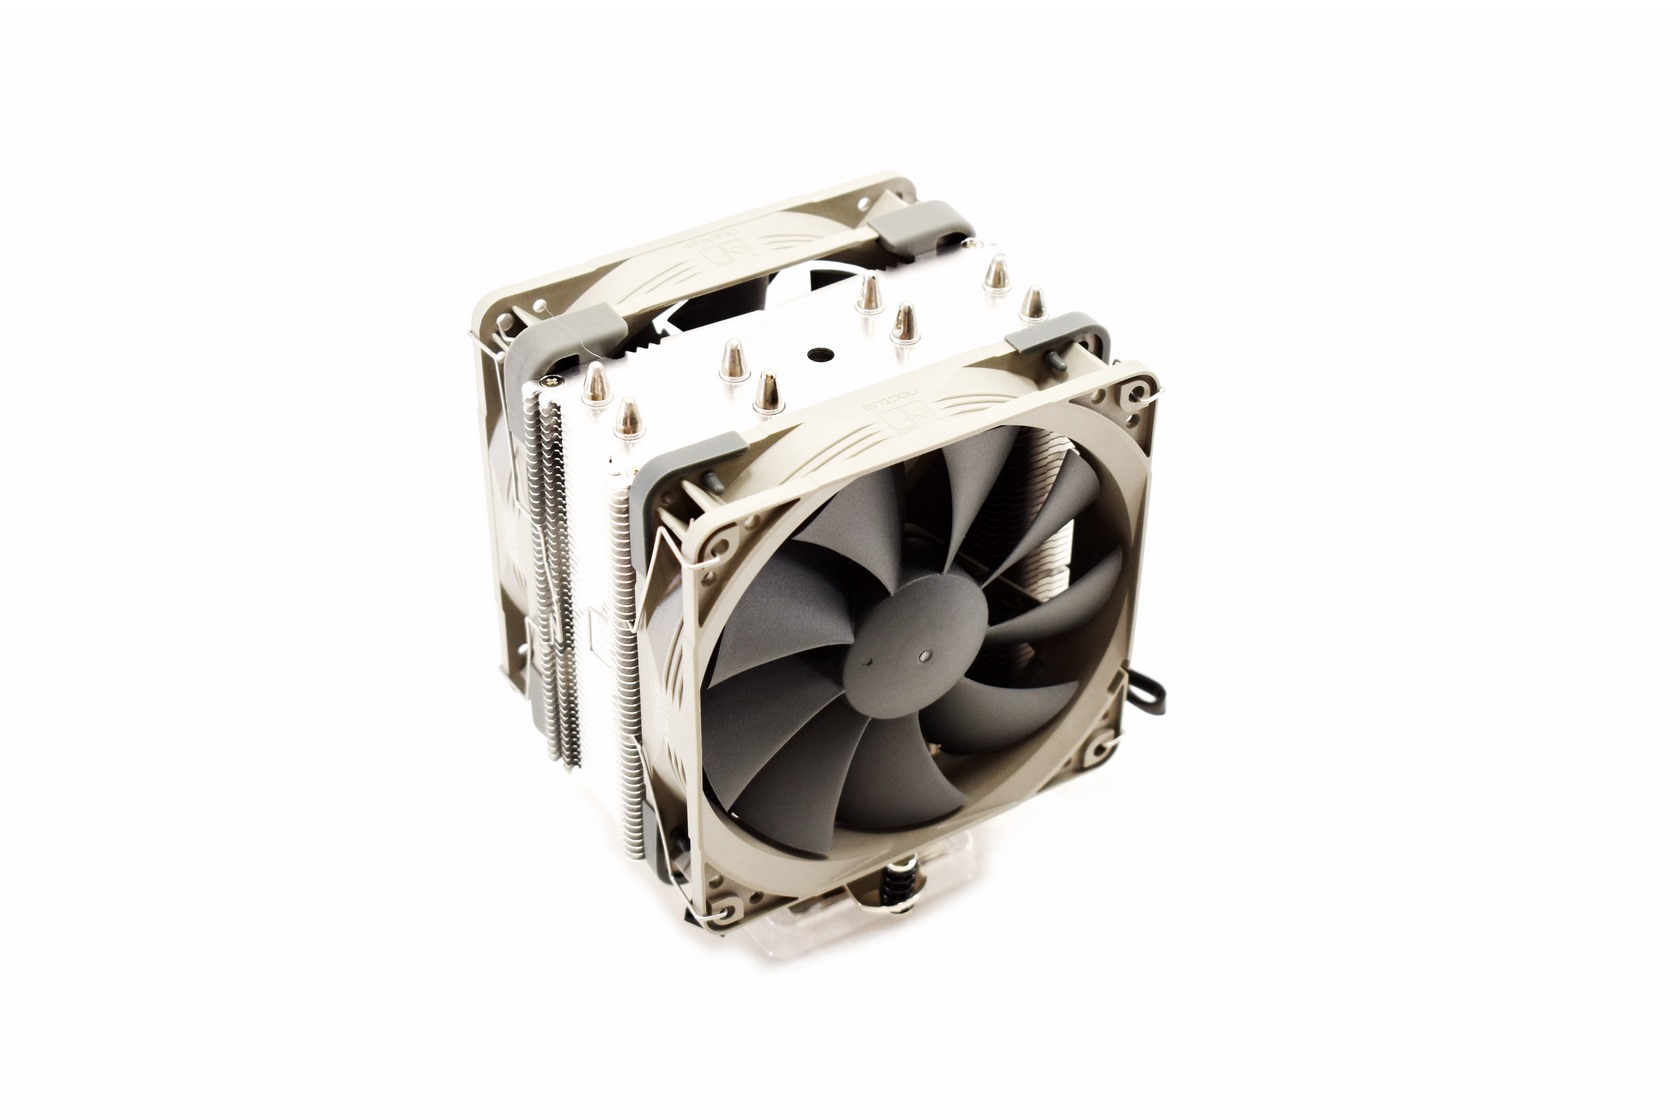 Noctua Updates the NH-U12S as the Redux Product Line's First CPU